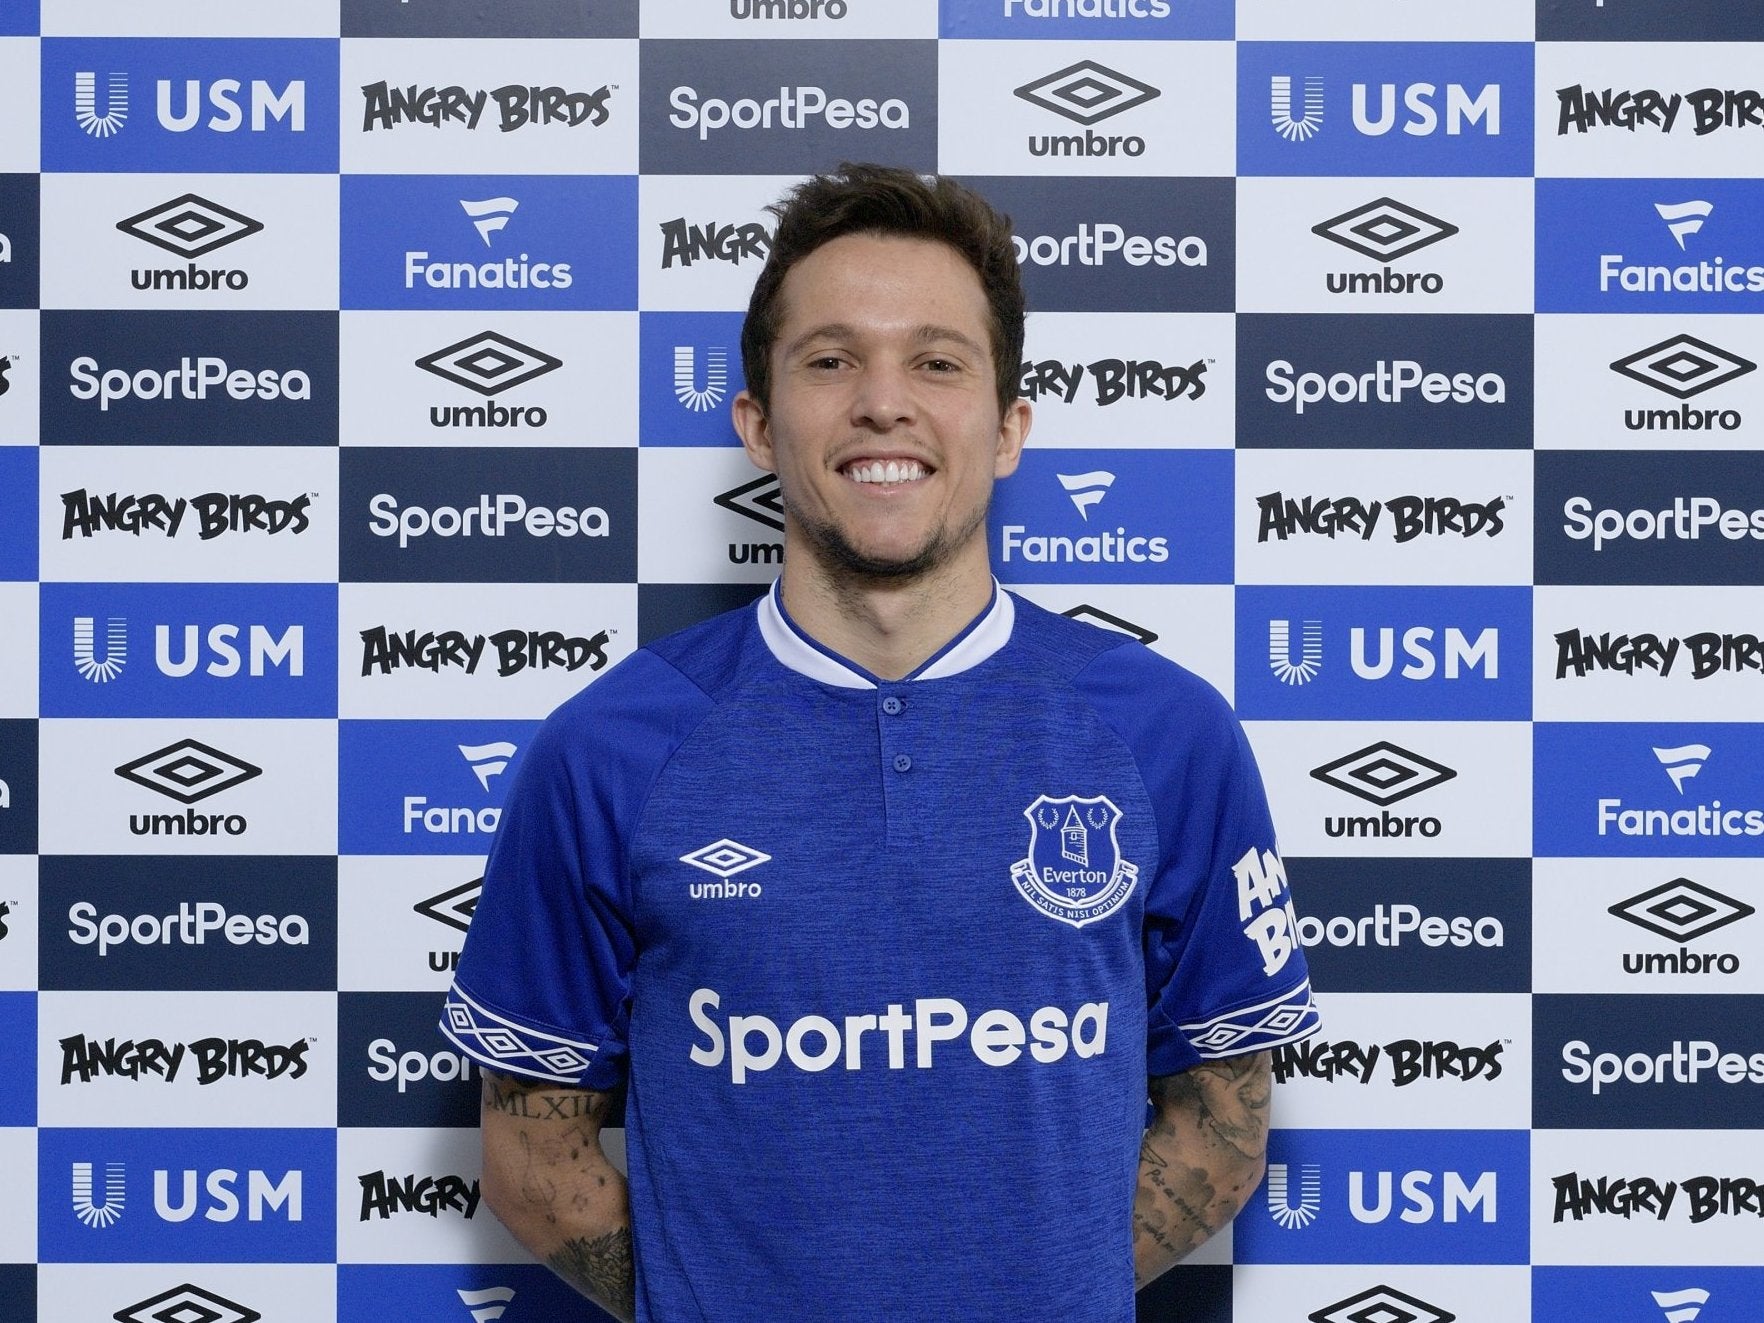 Bernard has signed a four-year deal with Everton